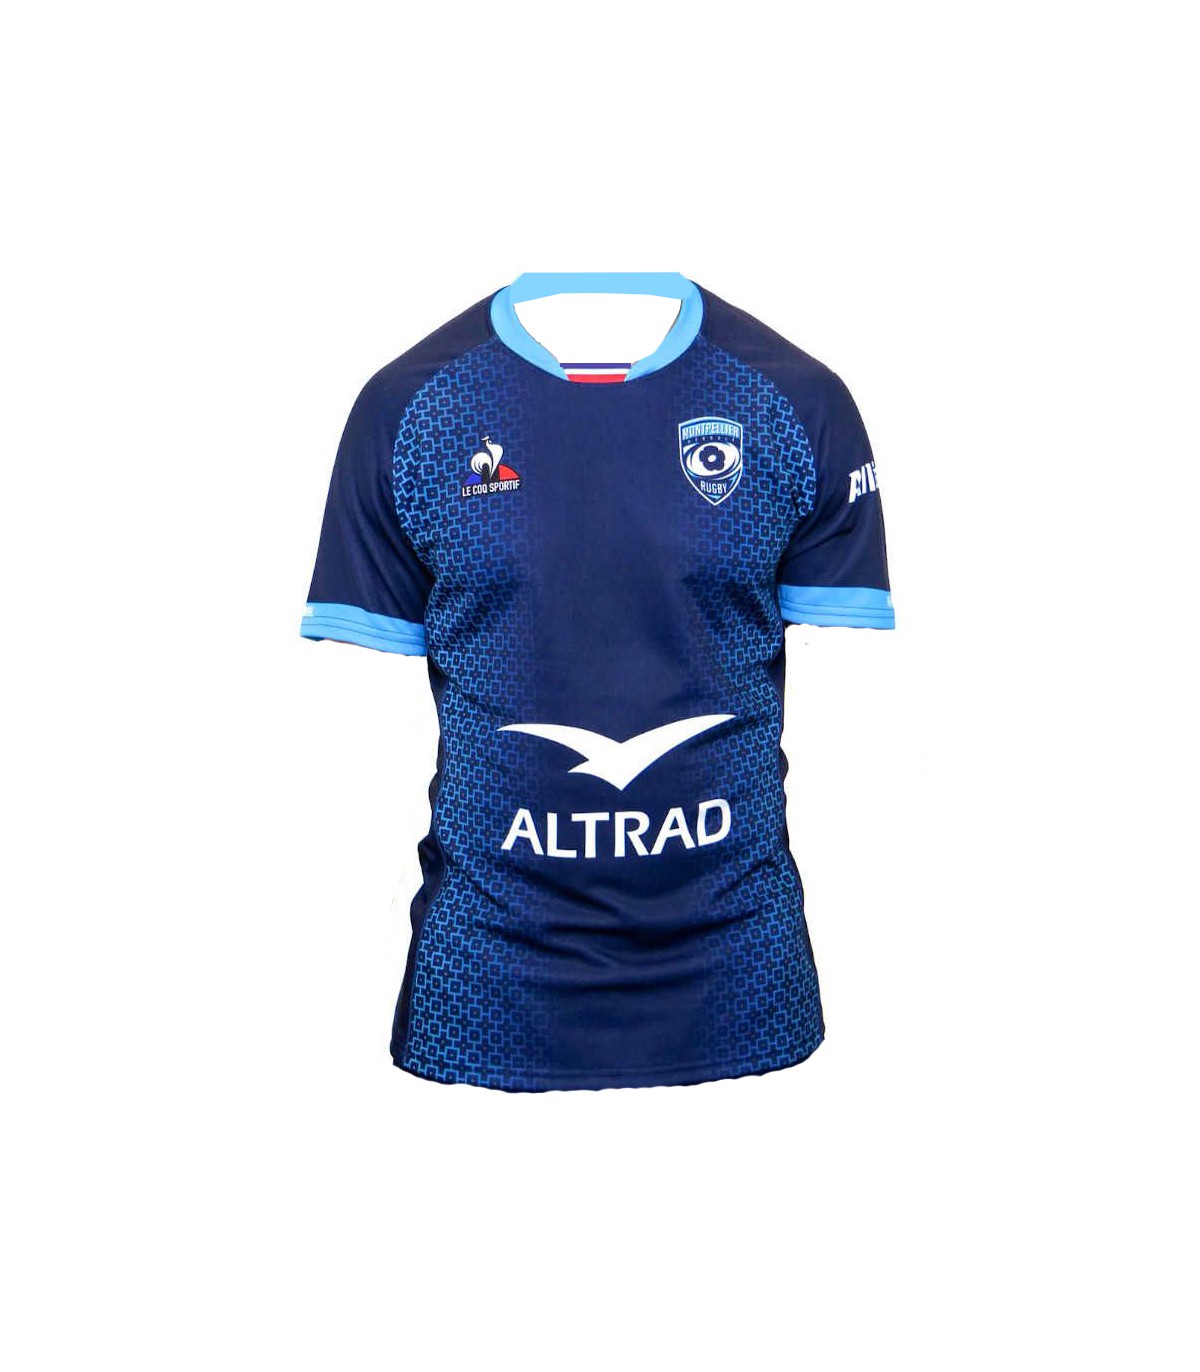 Maillot Rugby Home Montpellier Adulte 2019-20 / Kappa